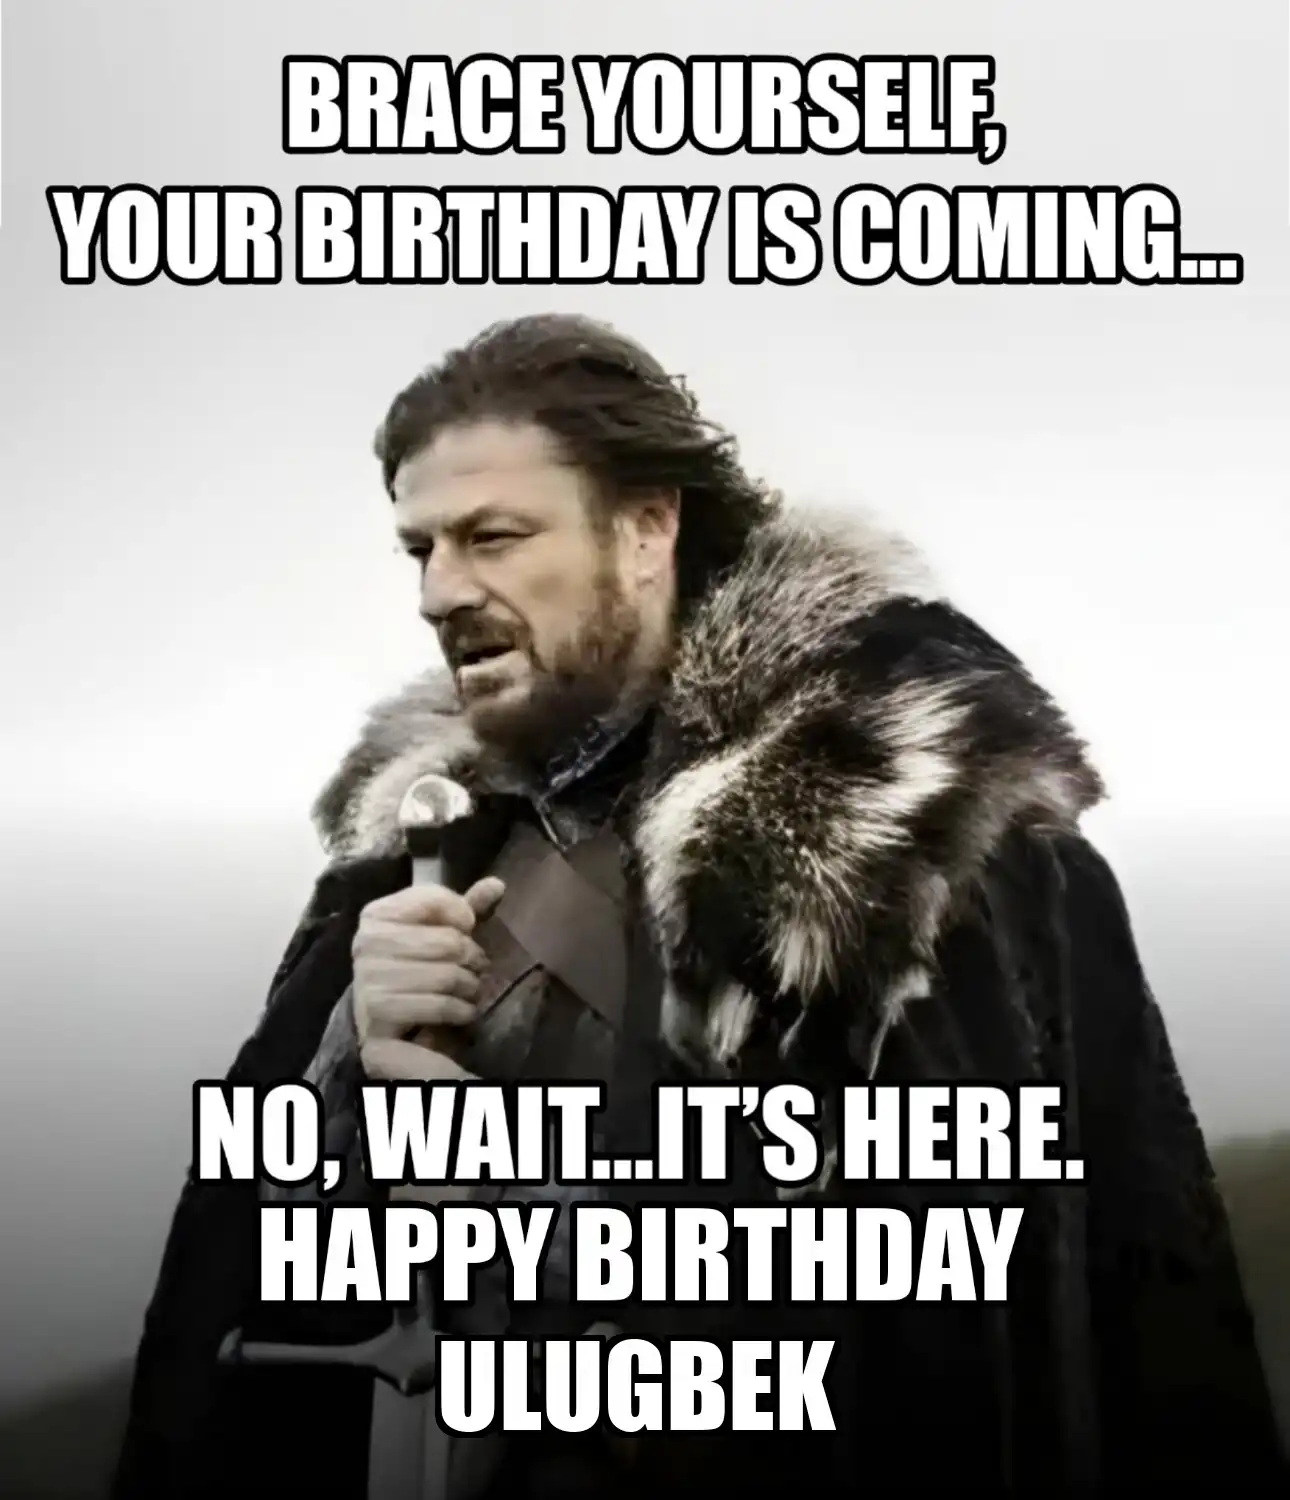 Happy Birthday Ulugbek Brace Yourself Your Birthday Is Coming Meme